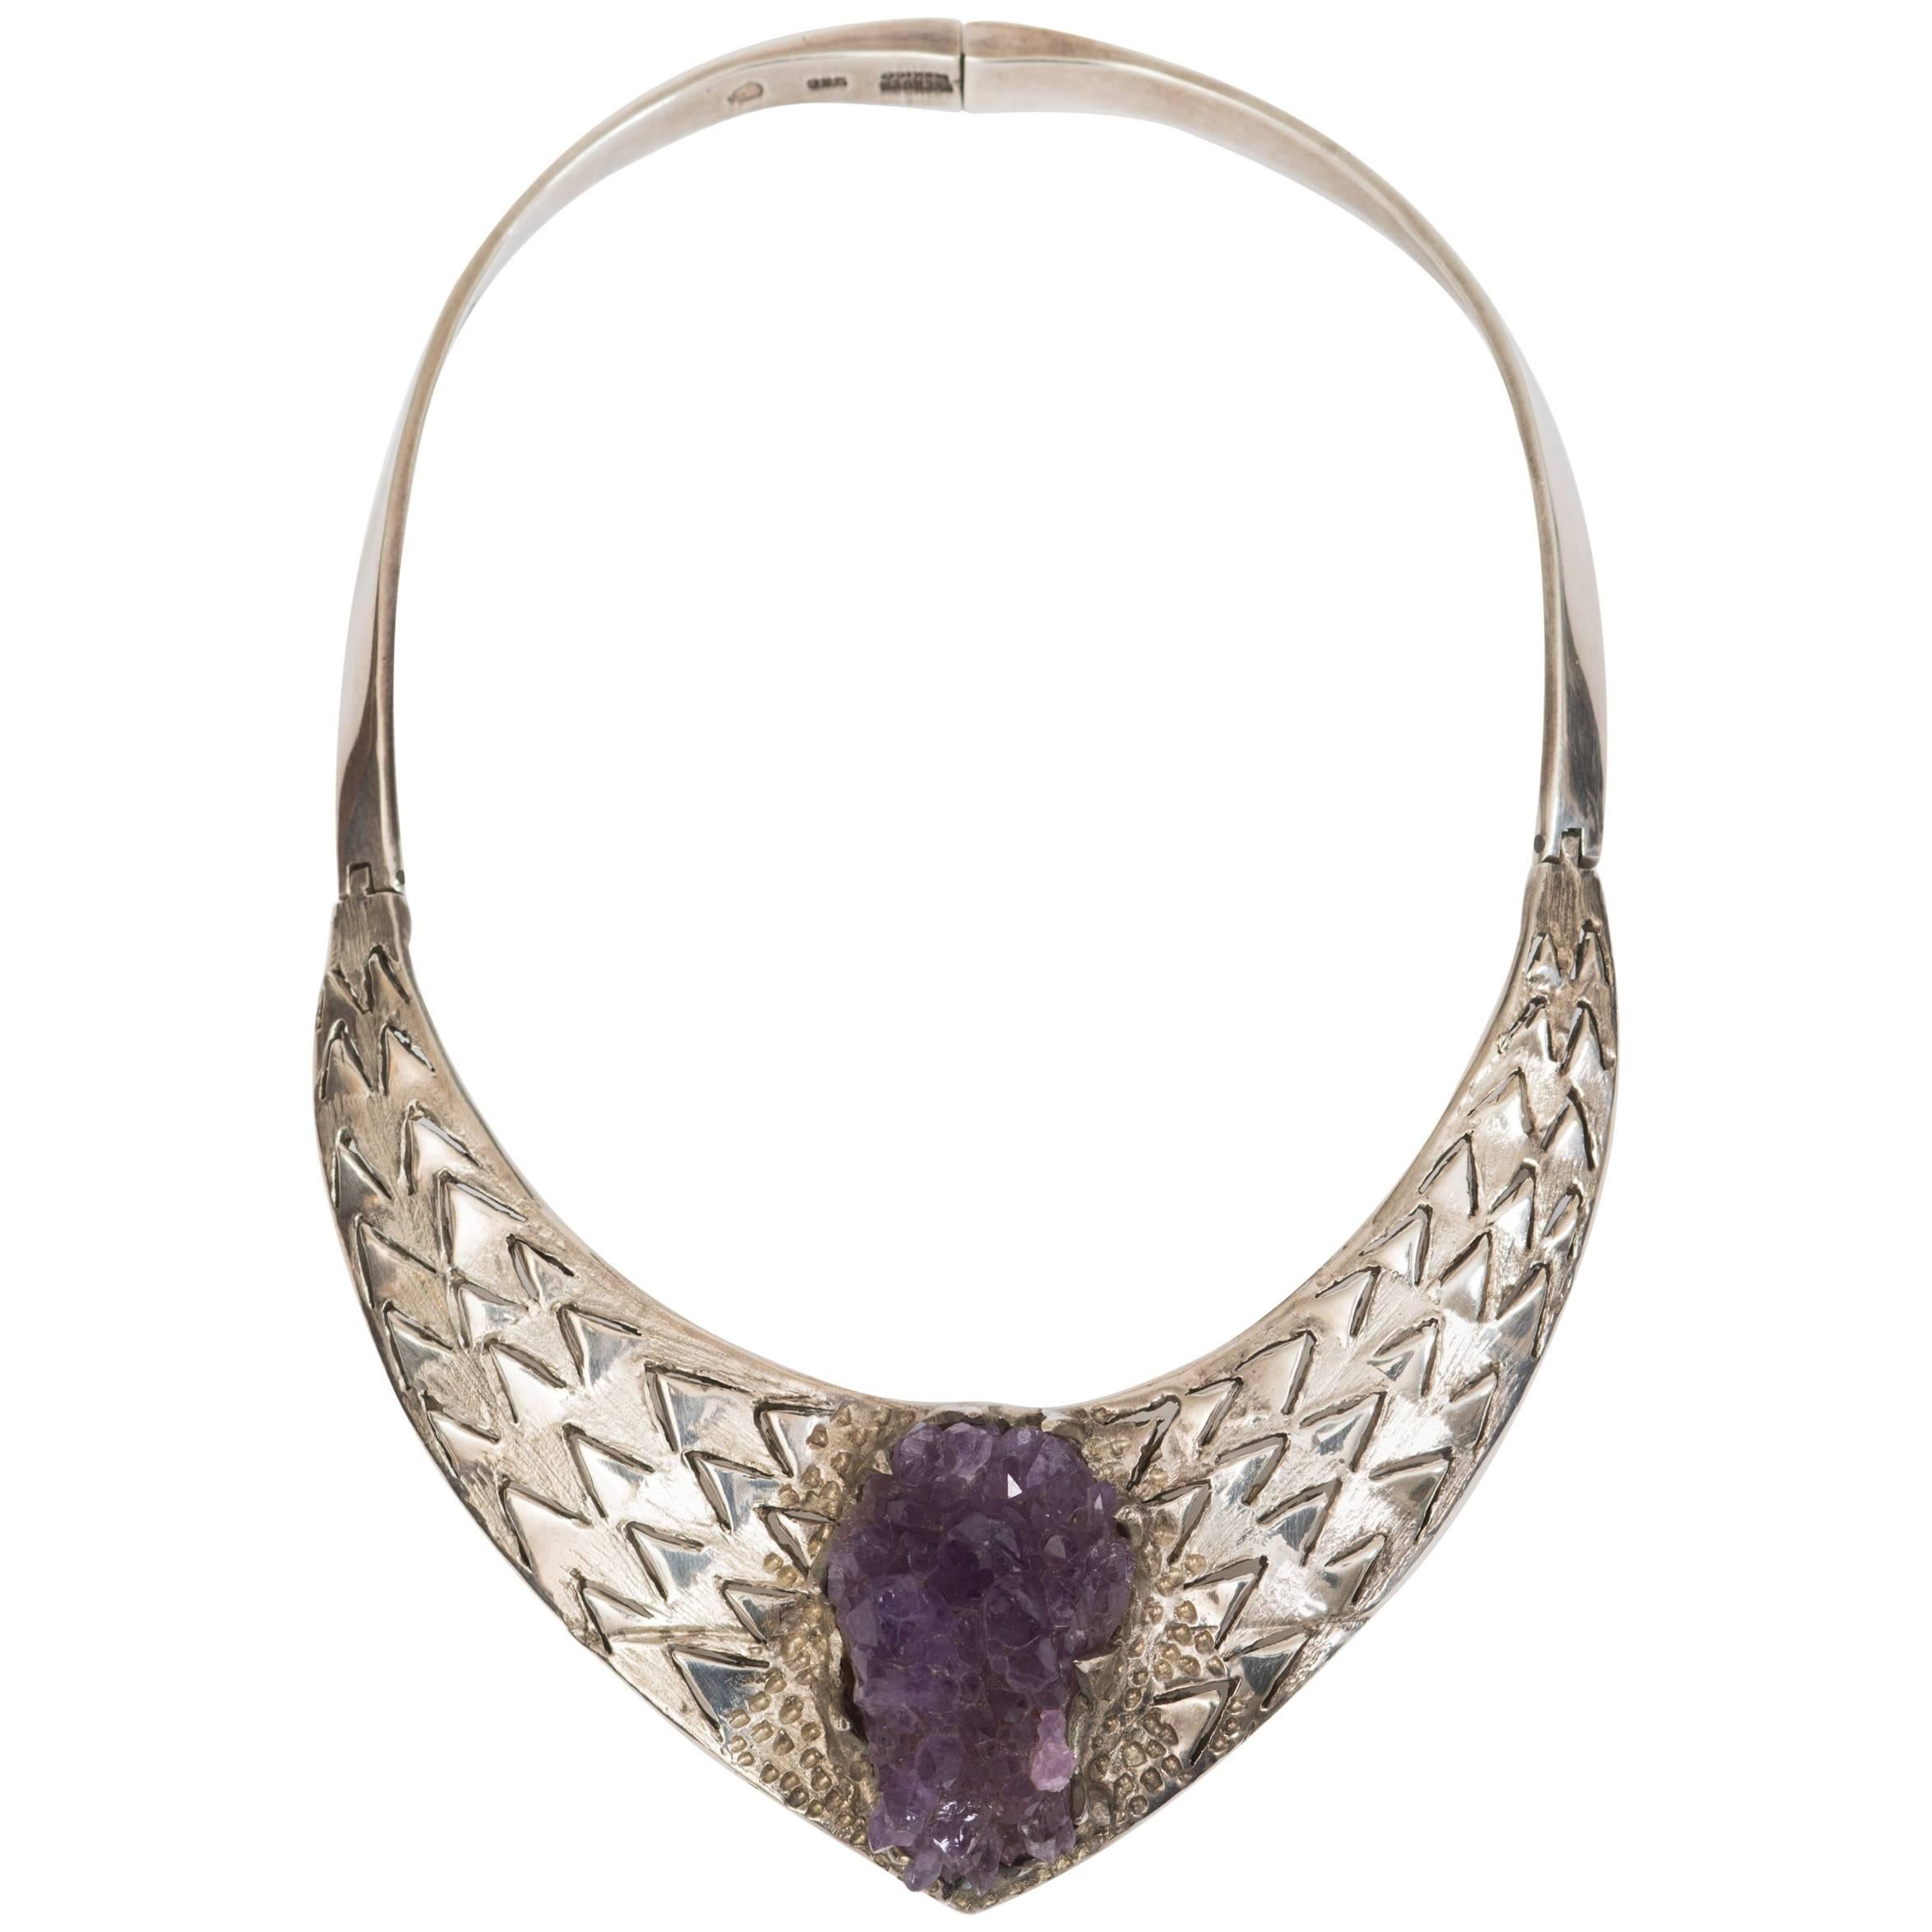 Brutalist 1970s Mexican Silver and Amethyst Necklace by Josefina Zagal